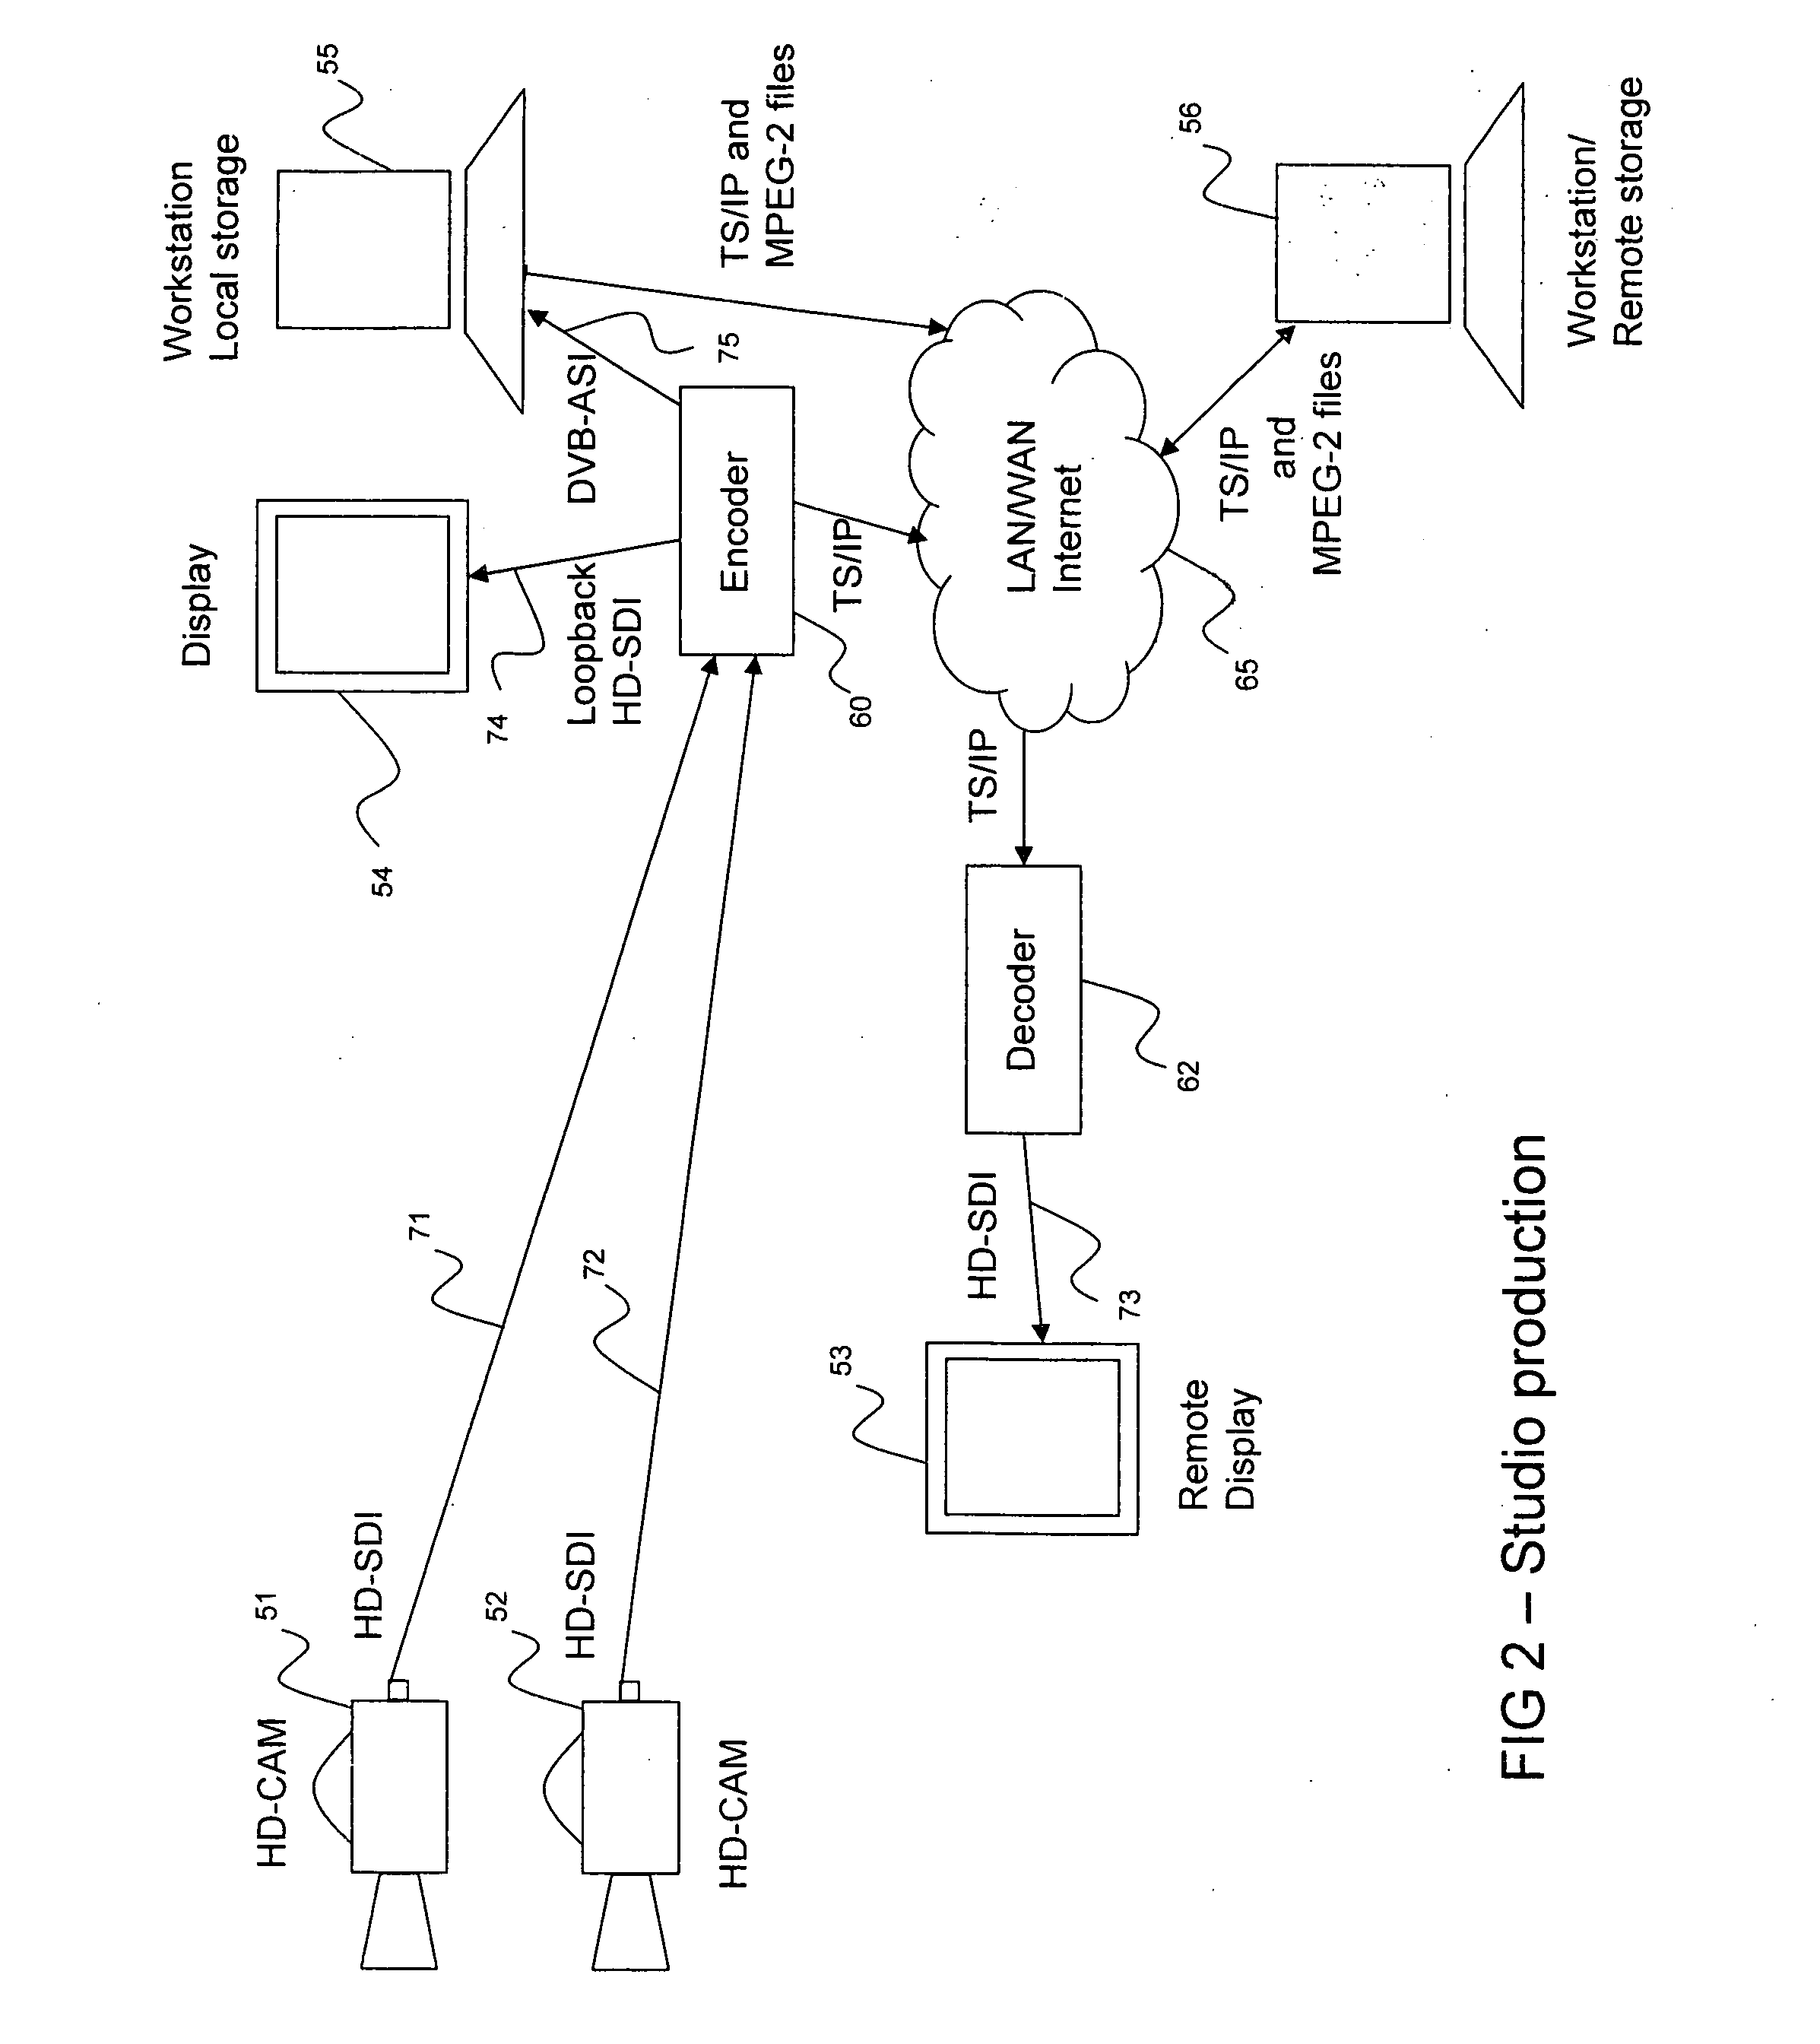 Flexible frame based energy efficient multimedia processor architecture and method